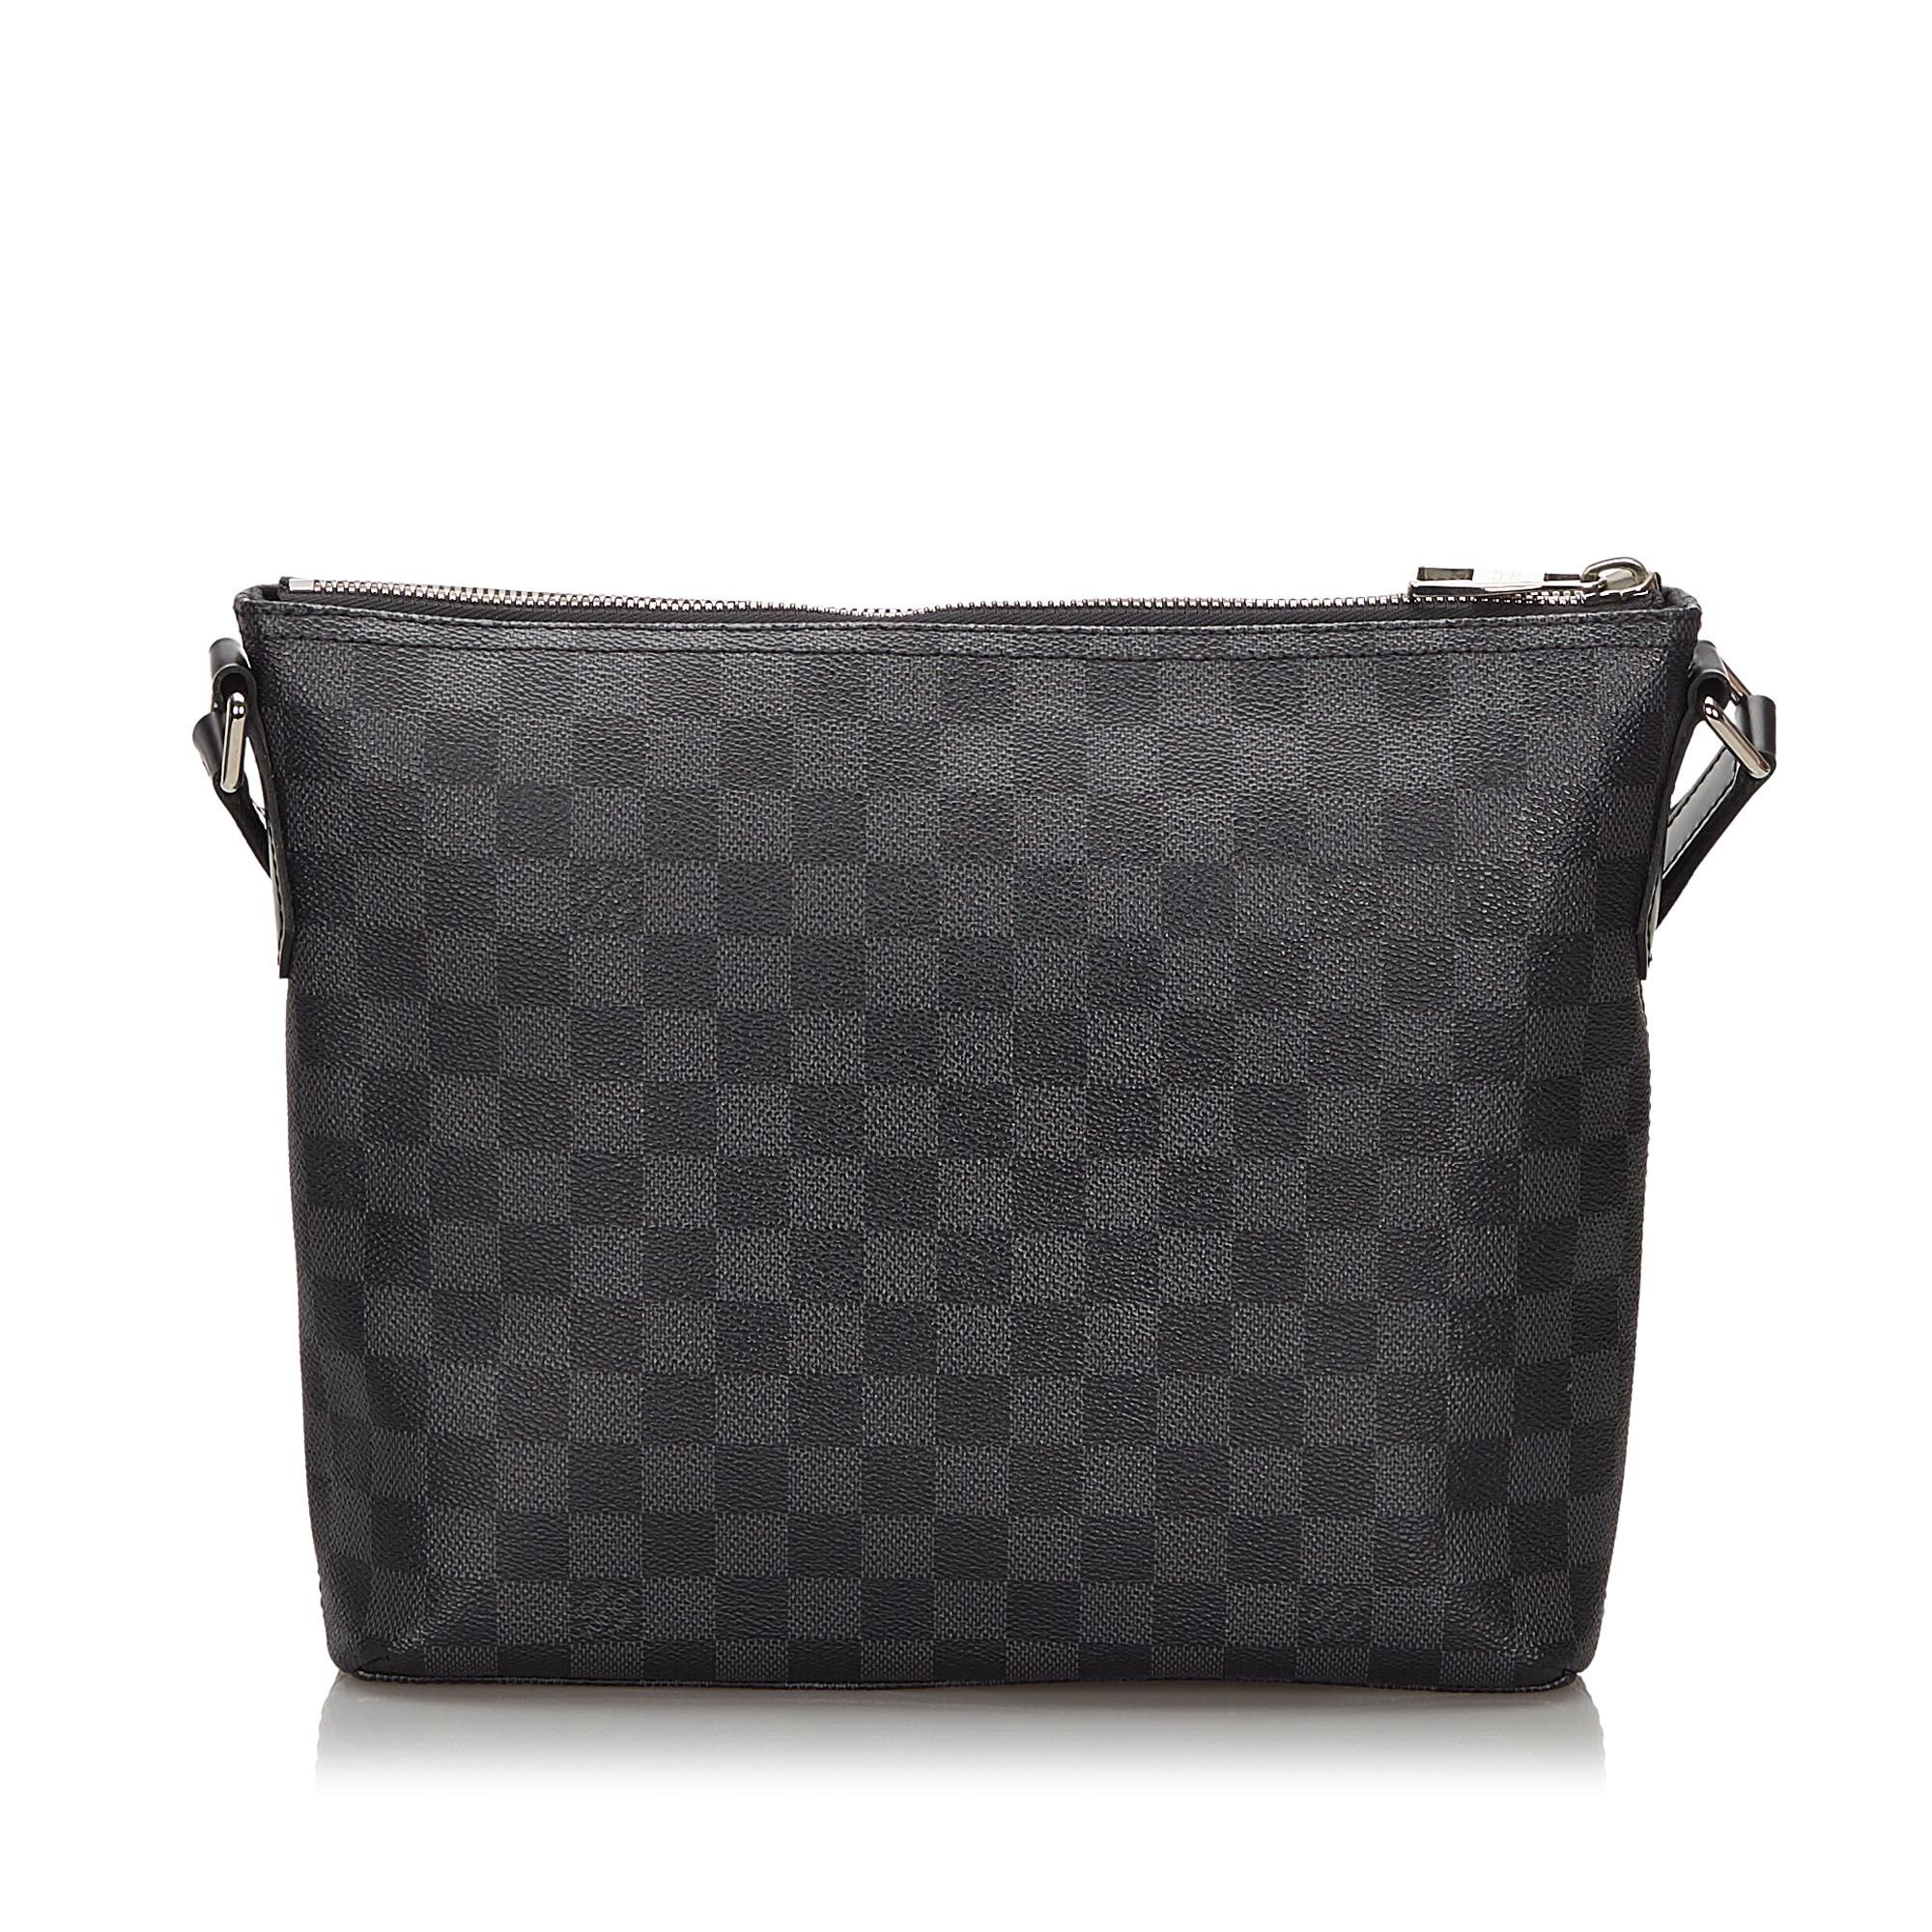 Vintage Authentic Louis Vuitton Black Graphite Mick PM France SMALL  In Good Condition For Sale In Orlando, FL